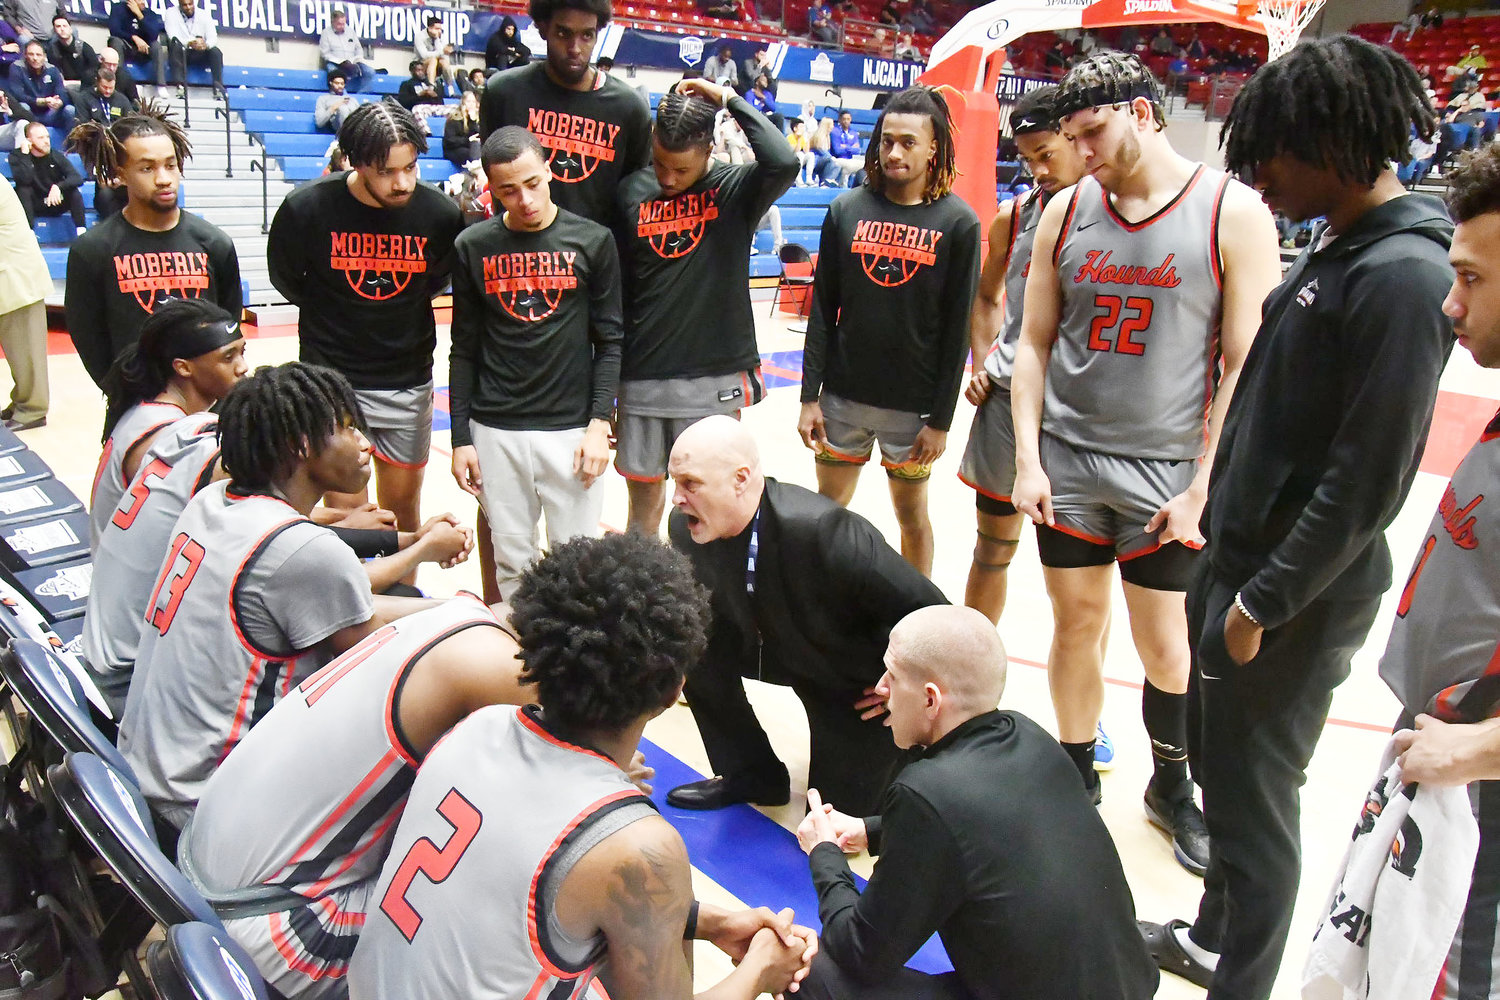 Moberly Area Community College head men's basketball coach Patrick Smith talks to the team during a timeout in the second half.